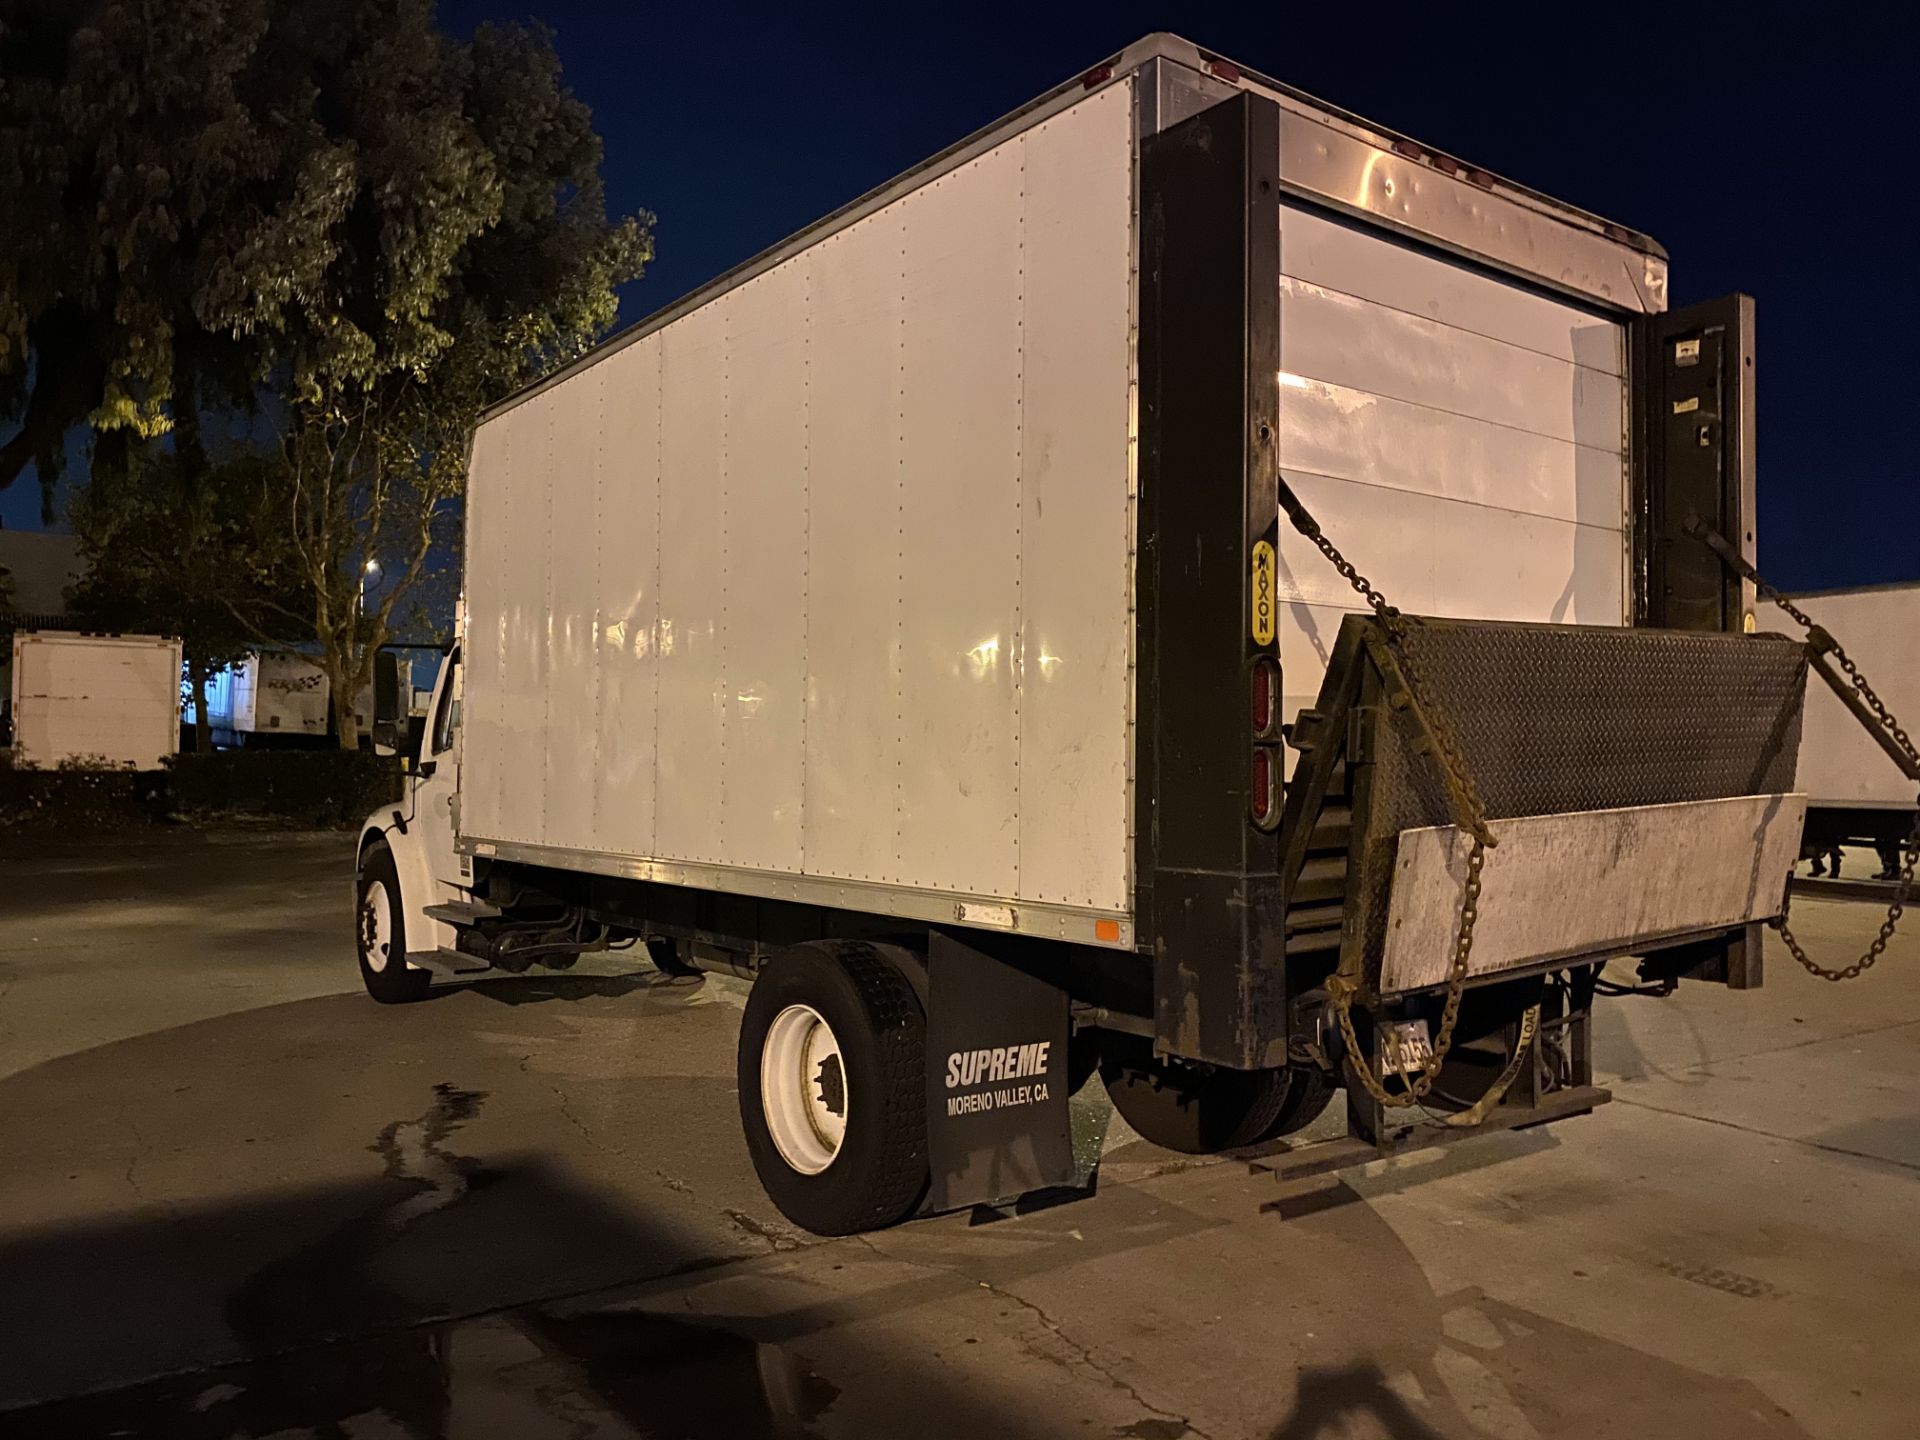 2005 Freightliner refrigerated truck - Image 2 of 5